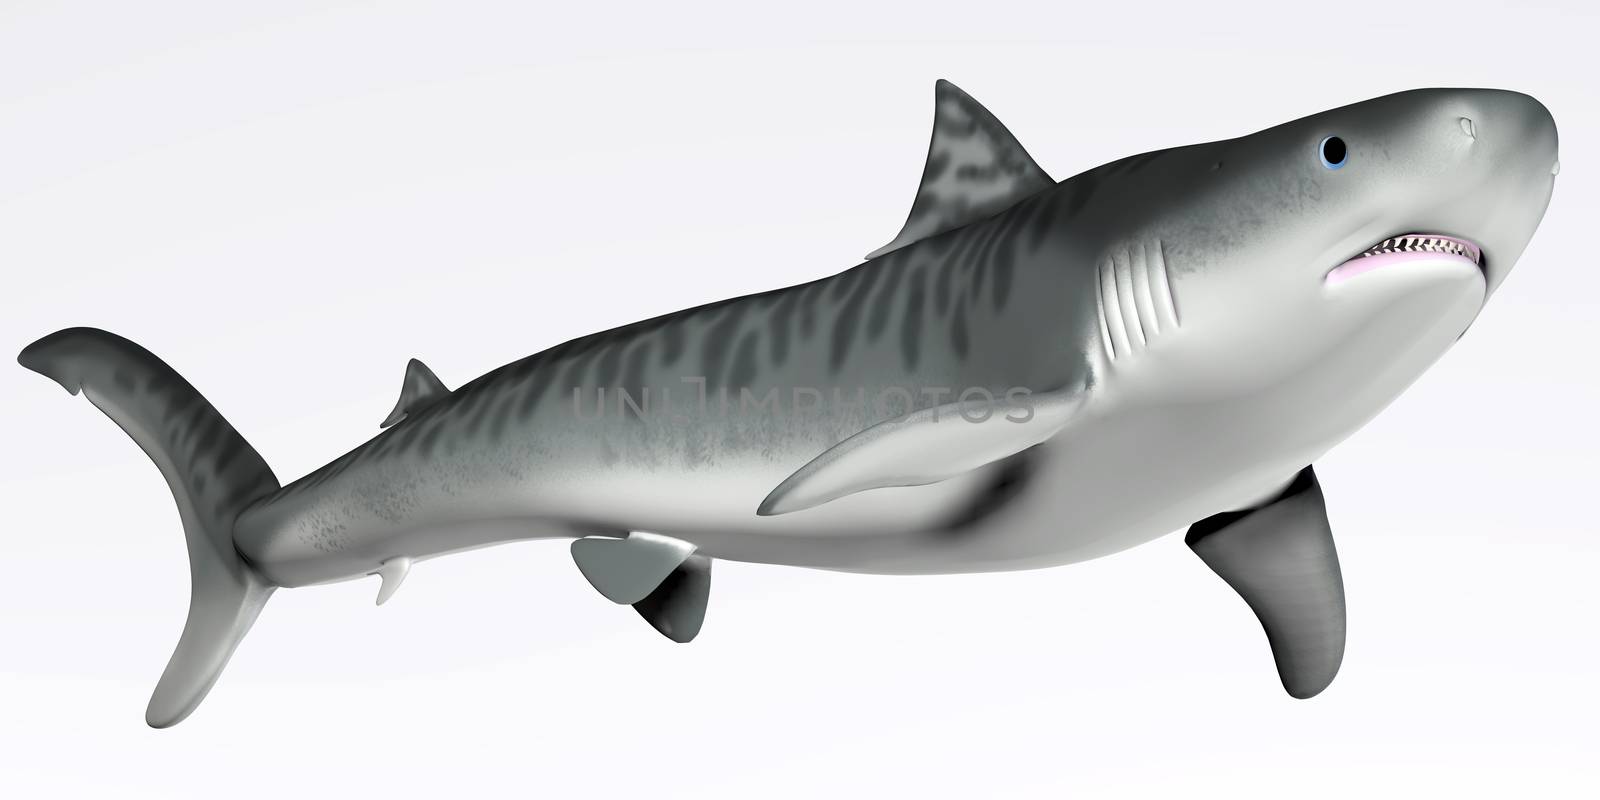 Tiger Shark on White by Catmando